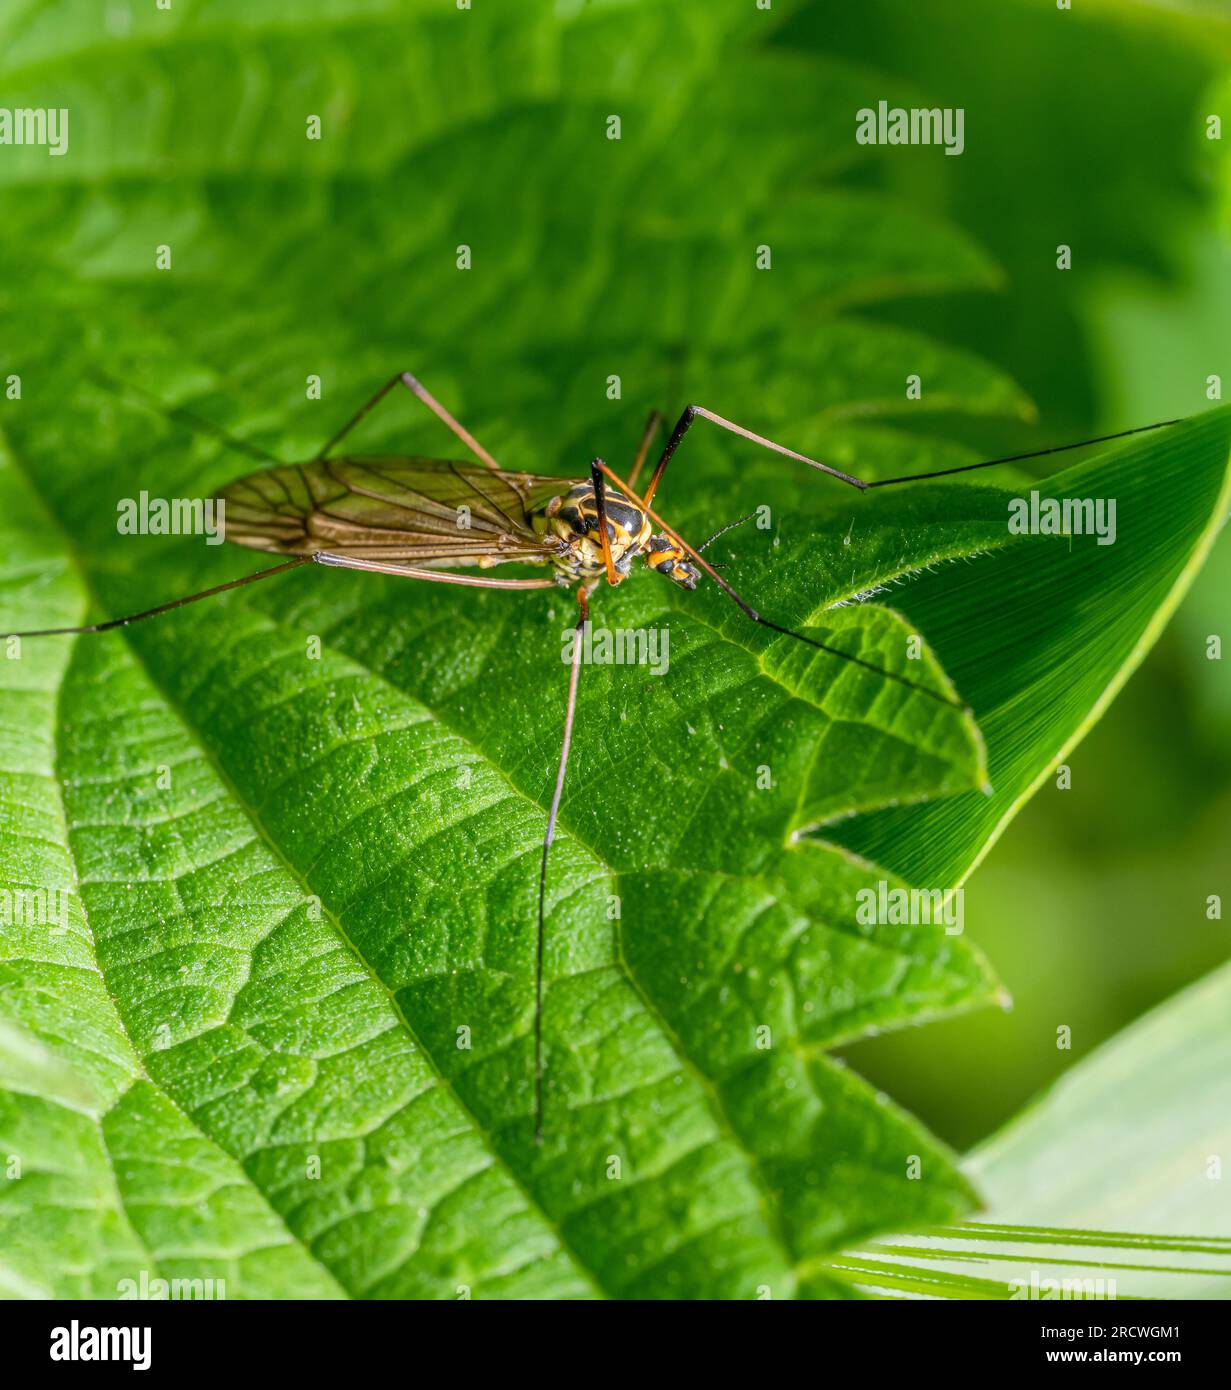 macro shot of a spotted crane fly resting on a stinging nettle leaf Stock Photo